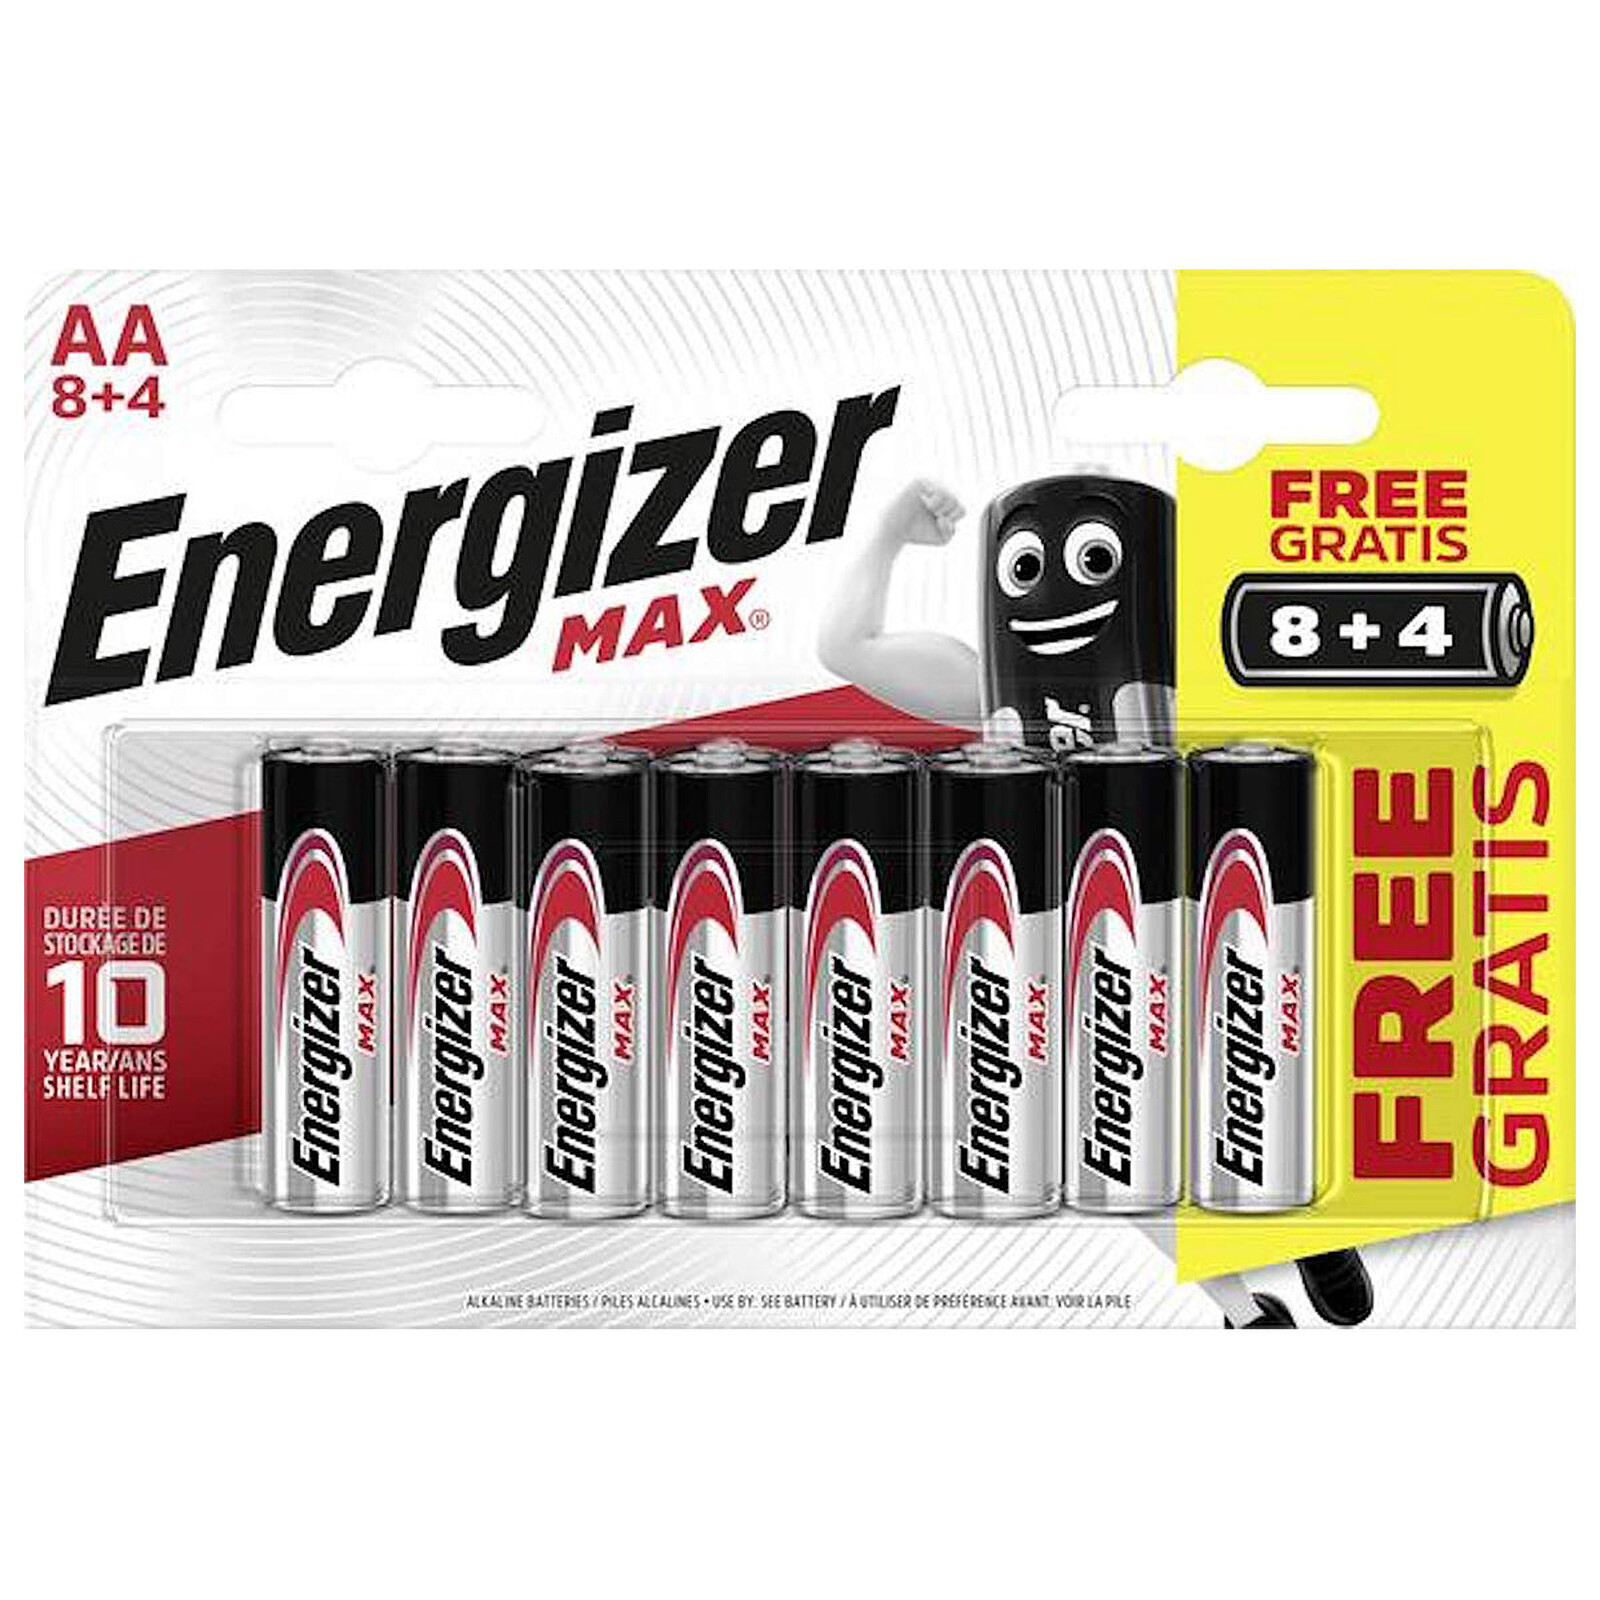 Energizer Max AA (set of 12) - Battery & charger - LDLC